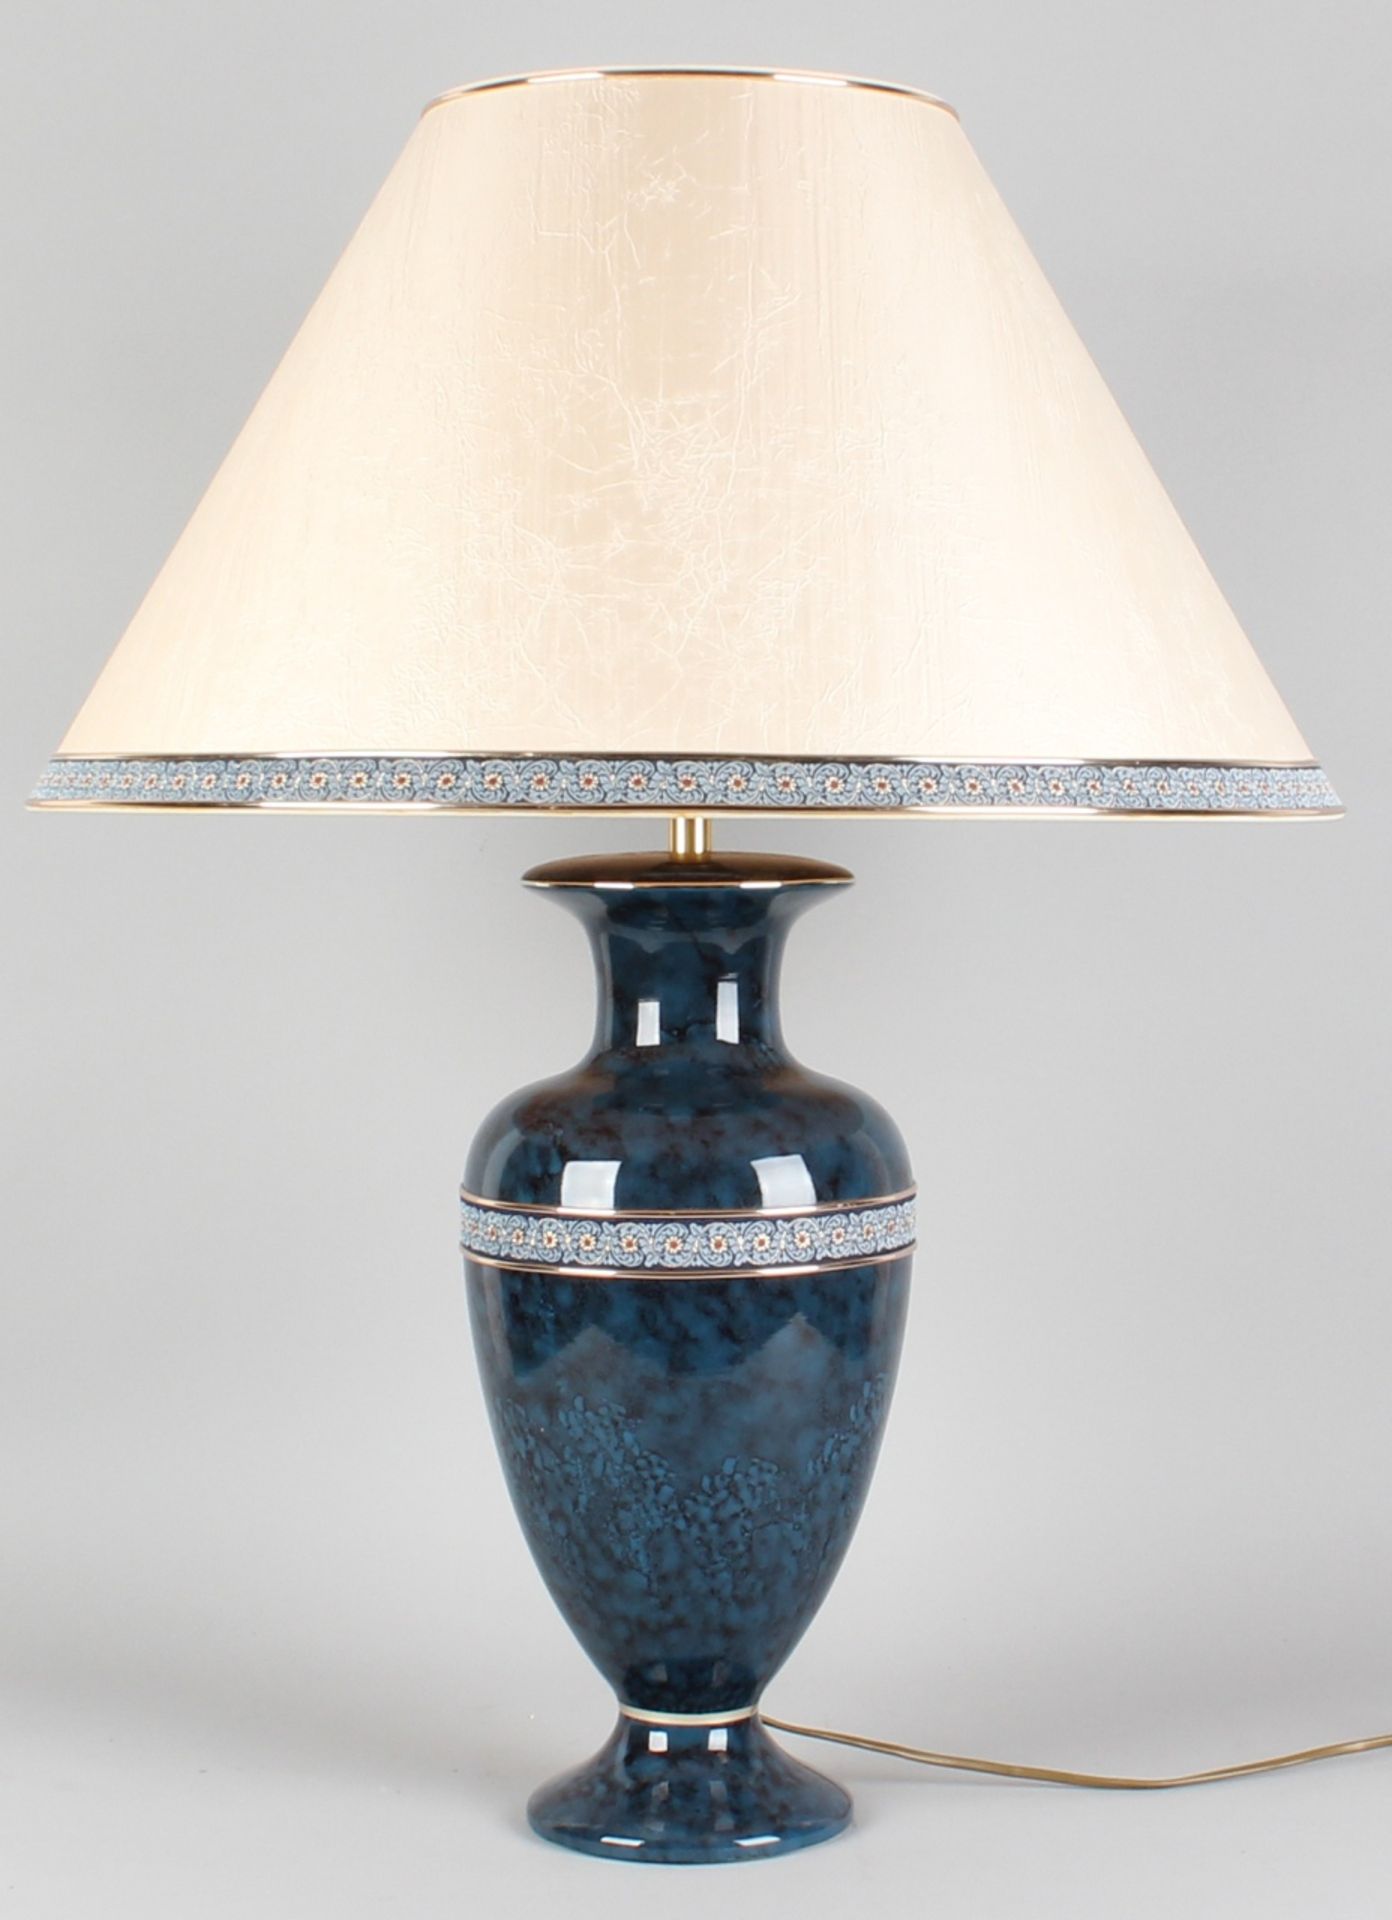 Autographed porcelain table lamp with porcelain base and nickel compounds surround (l.Drimmer) 2nd